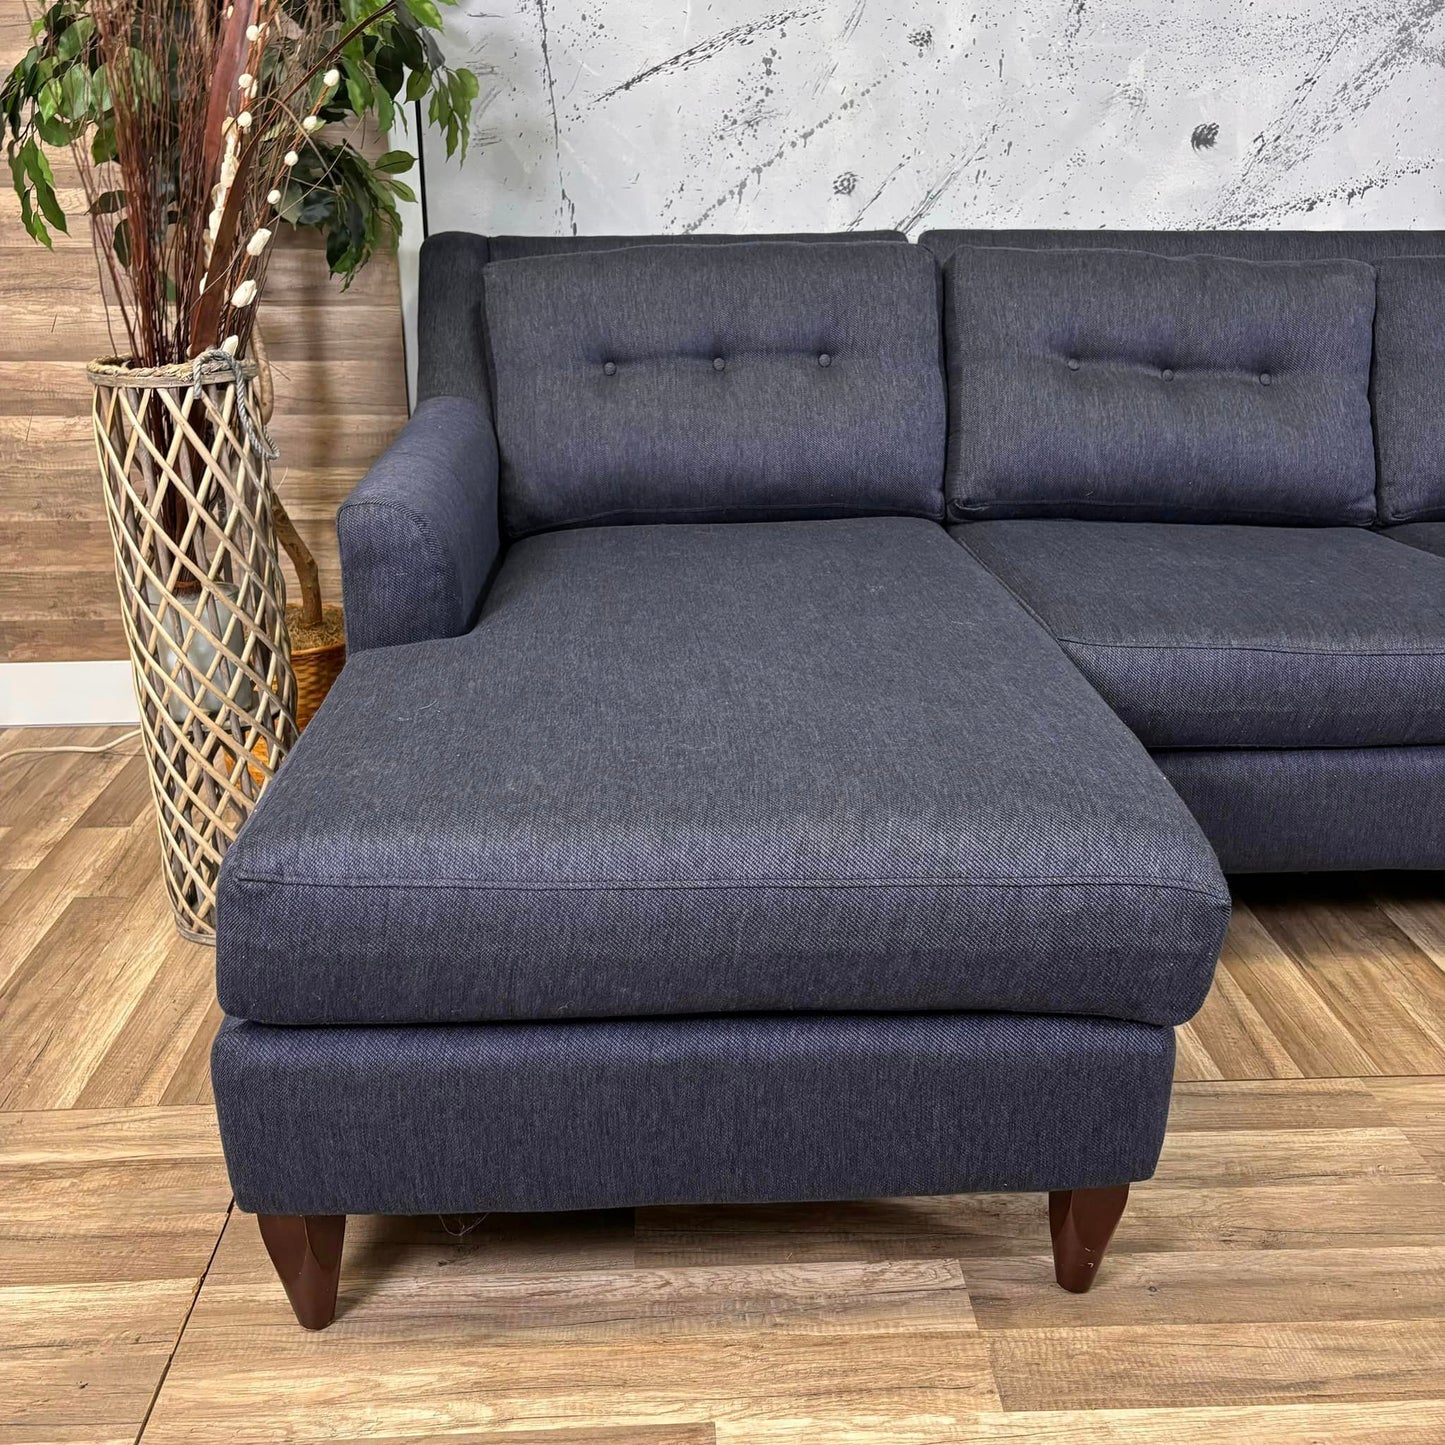 Blue Sectional With Wooden Legs